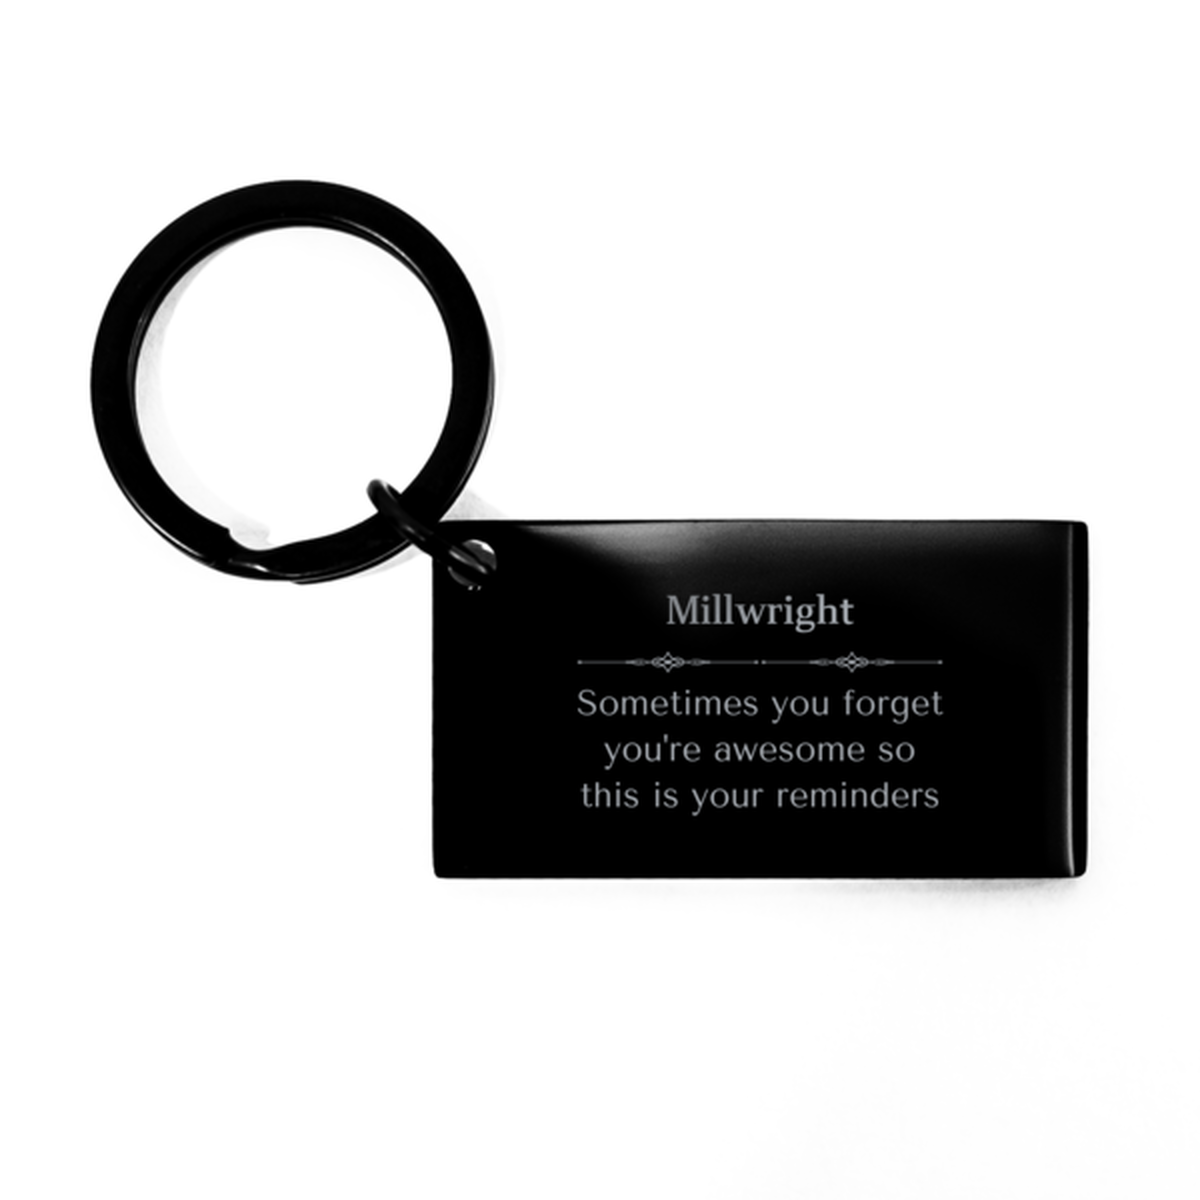 Sentimental Millwright Keychain, Orderly Sometimes you forget you're awesome so this is your reminders, Graduation Christmas Birthday Gifts for Millwright, Men, Women, Coworkers